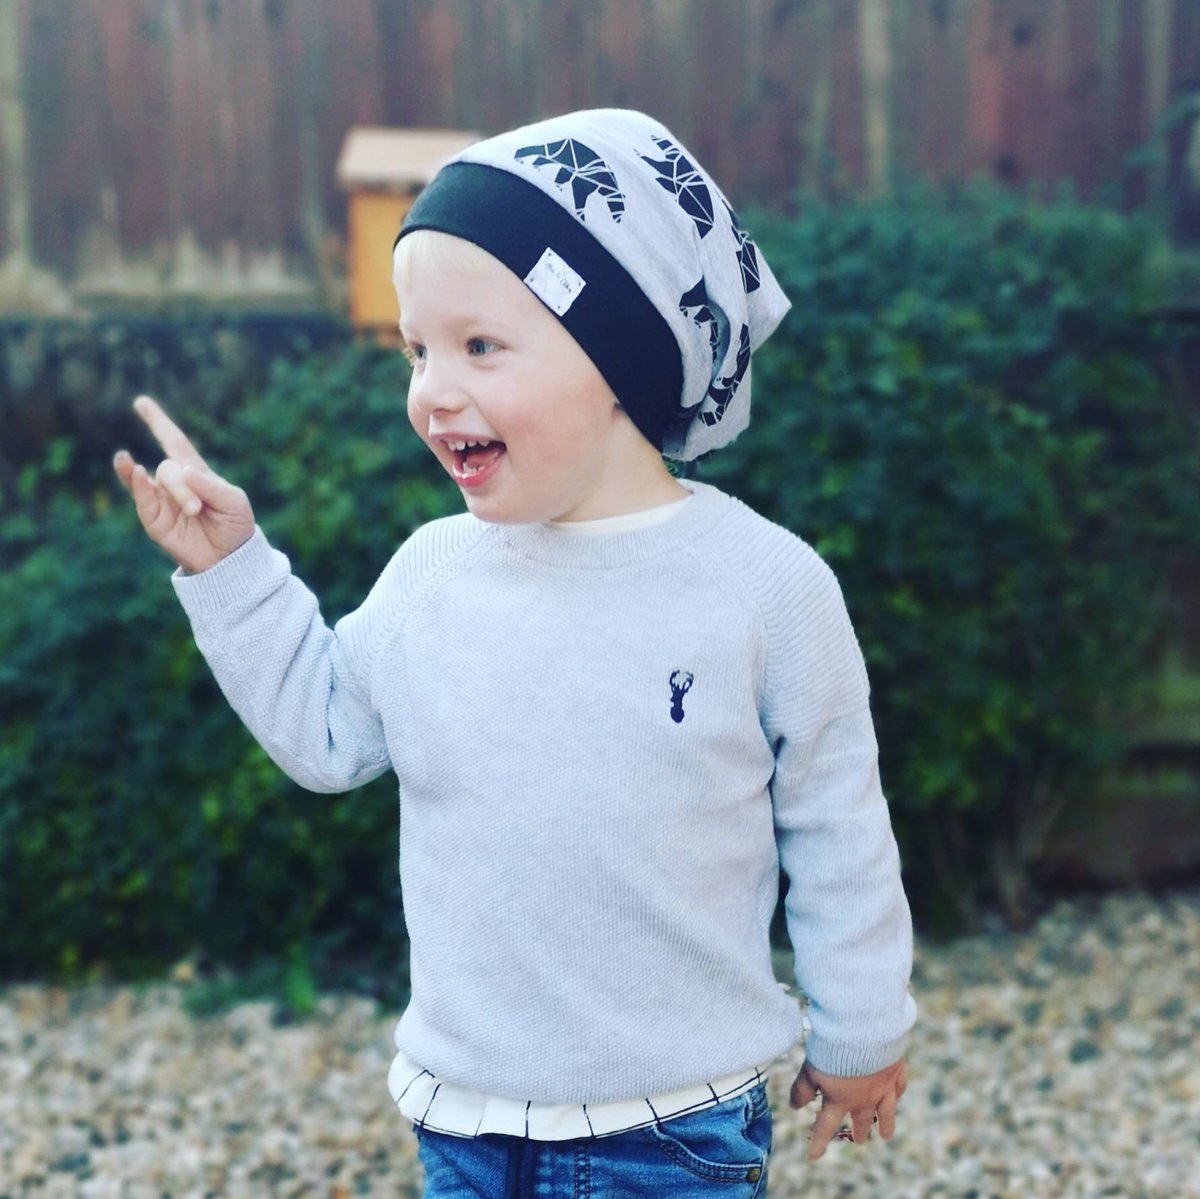 Excited to share the latest addition to my #etsy shop: Boys bear slouchy beenie, beenie hat, bears, toddler hat, boys beenie, boys accessories #accessories #hat #gray #black #slouchybeenie #beeniehat #boyshat #boysaccessories #kidshat etsy.me/2QIGEy4